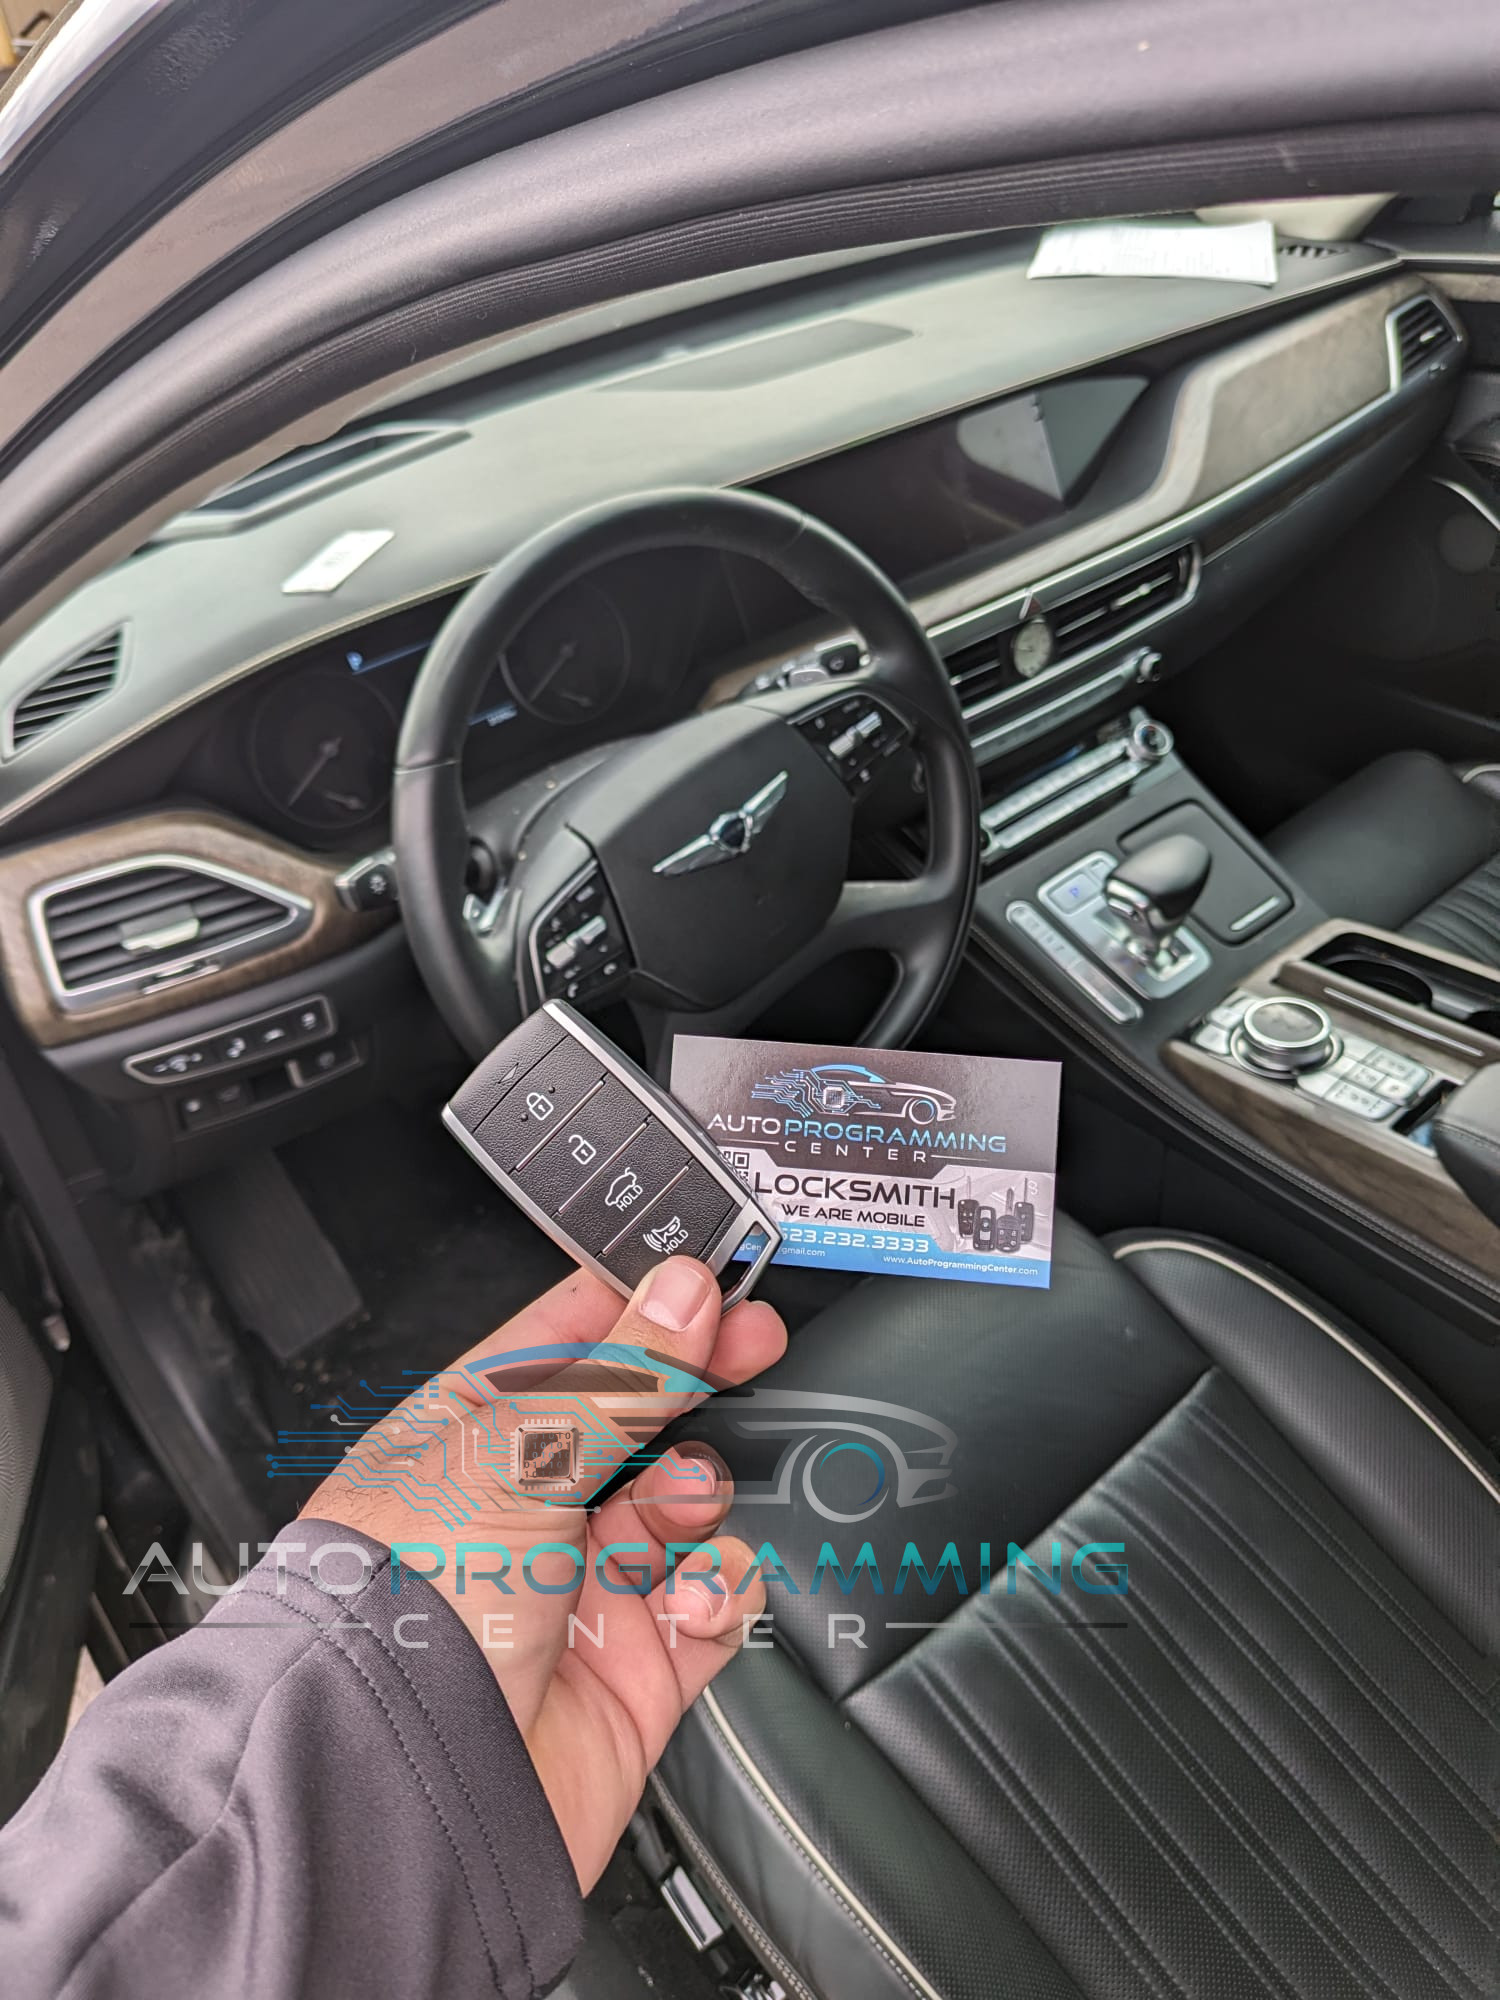 High-resolution image showcasing the sophisticated design and advanced features of a Genesis car key fob for seamless vehicle access and control.